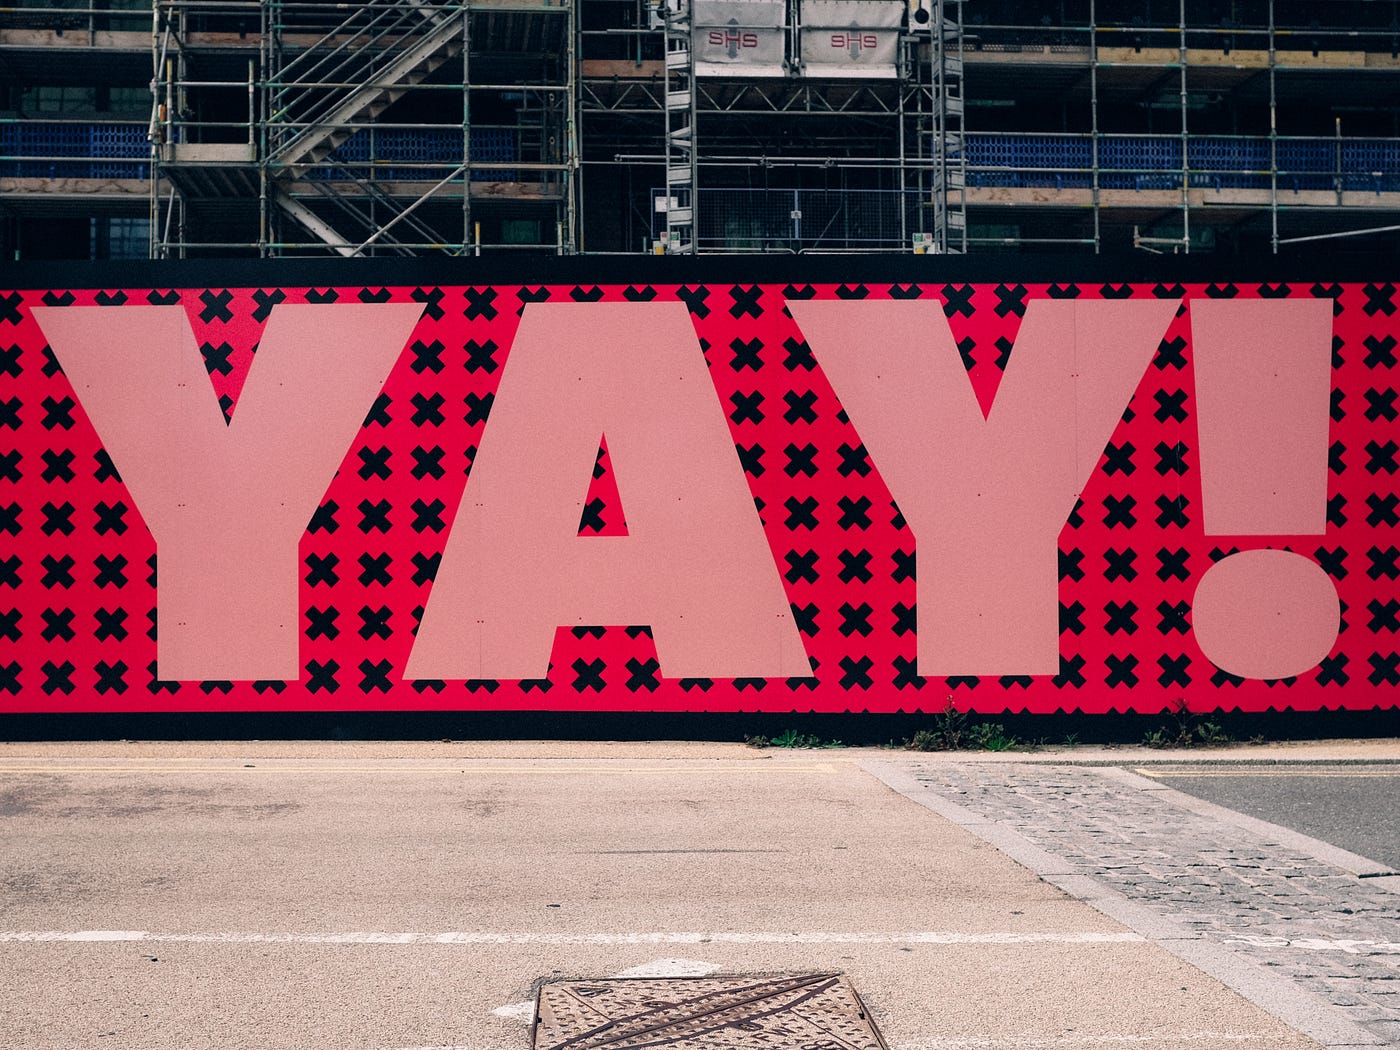 A large billboard-like sign that says YAY!